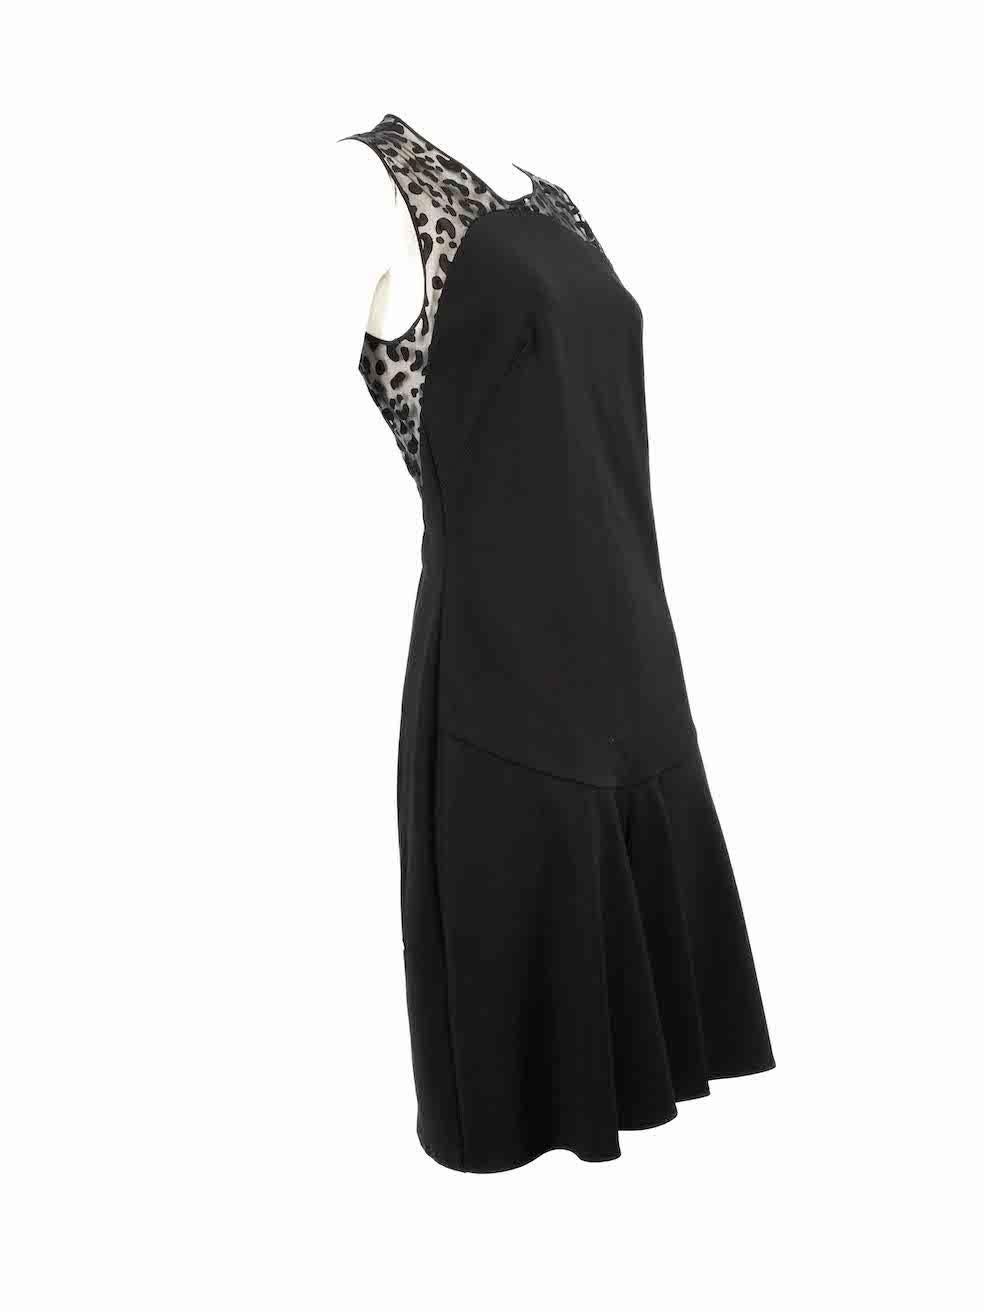 CONDITION is Very good. Hardly any visible wear to dress is evident on this used Stella McCartney designer resale item.
 
 
 
 Details
 
 
 Black
 
 Viscose
 
 Dress
 
 Round neck
 
 Sleeveless
 
 Sheer patterned top panel
 
 Back zip and hook